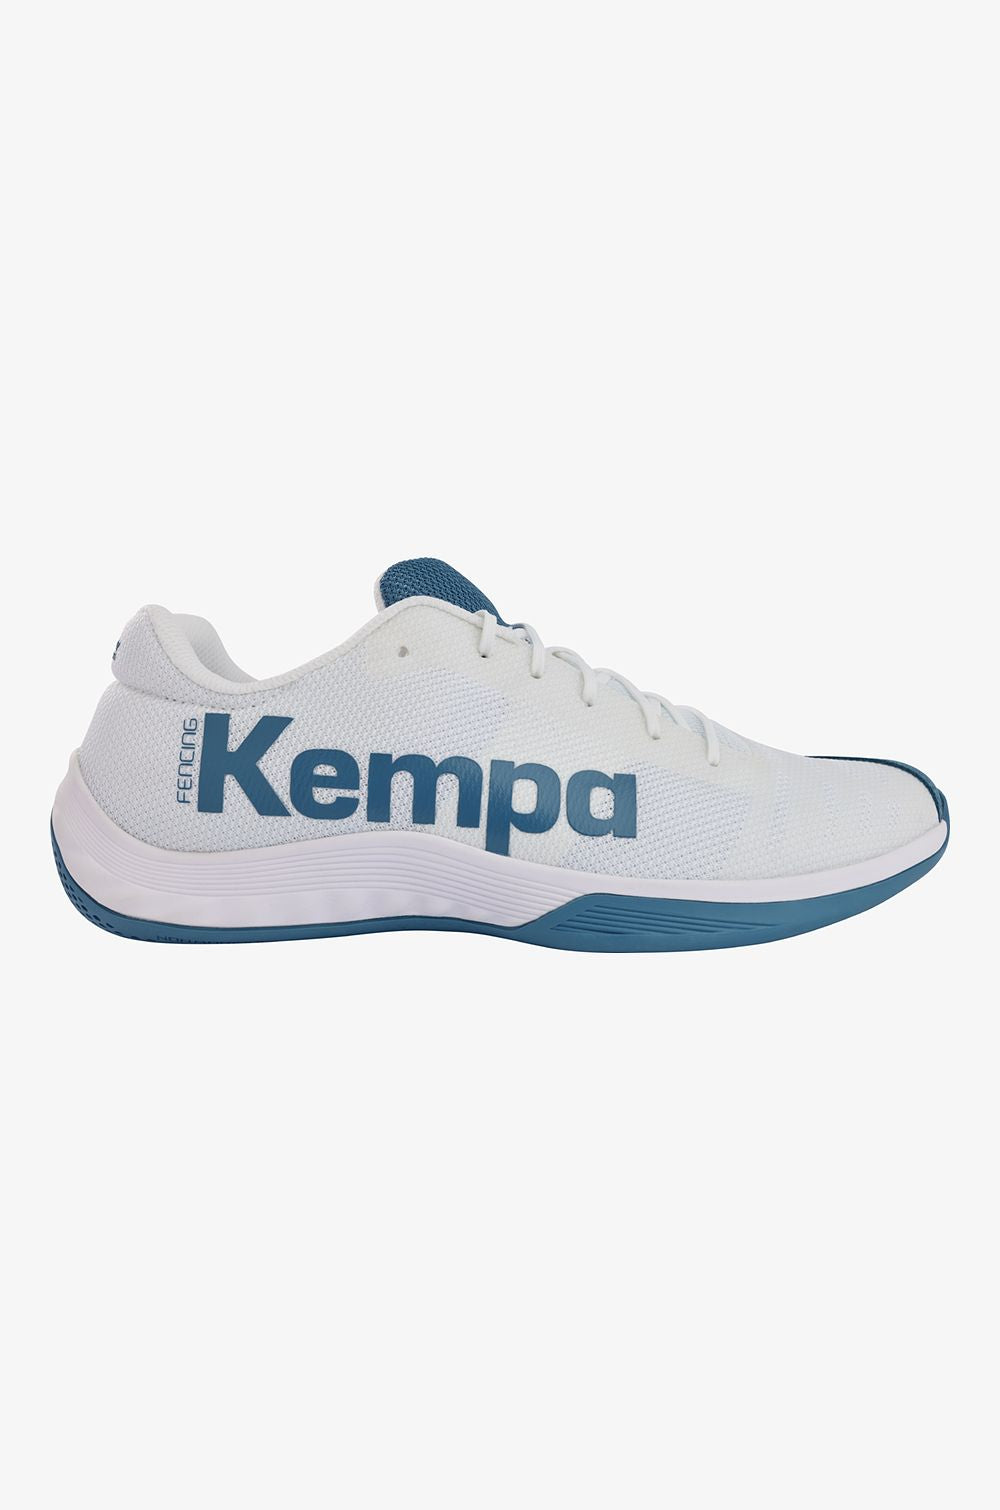 ALL STAR Kempa Shoes Attack Pro Fencing Shoes